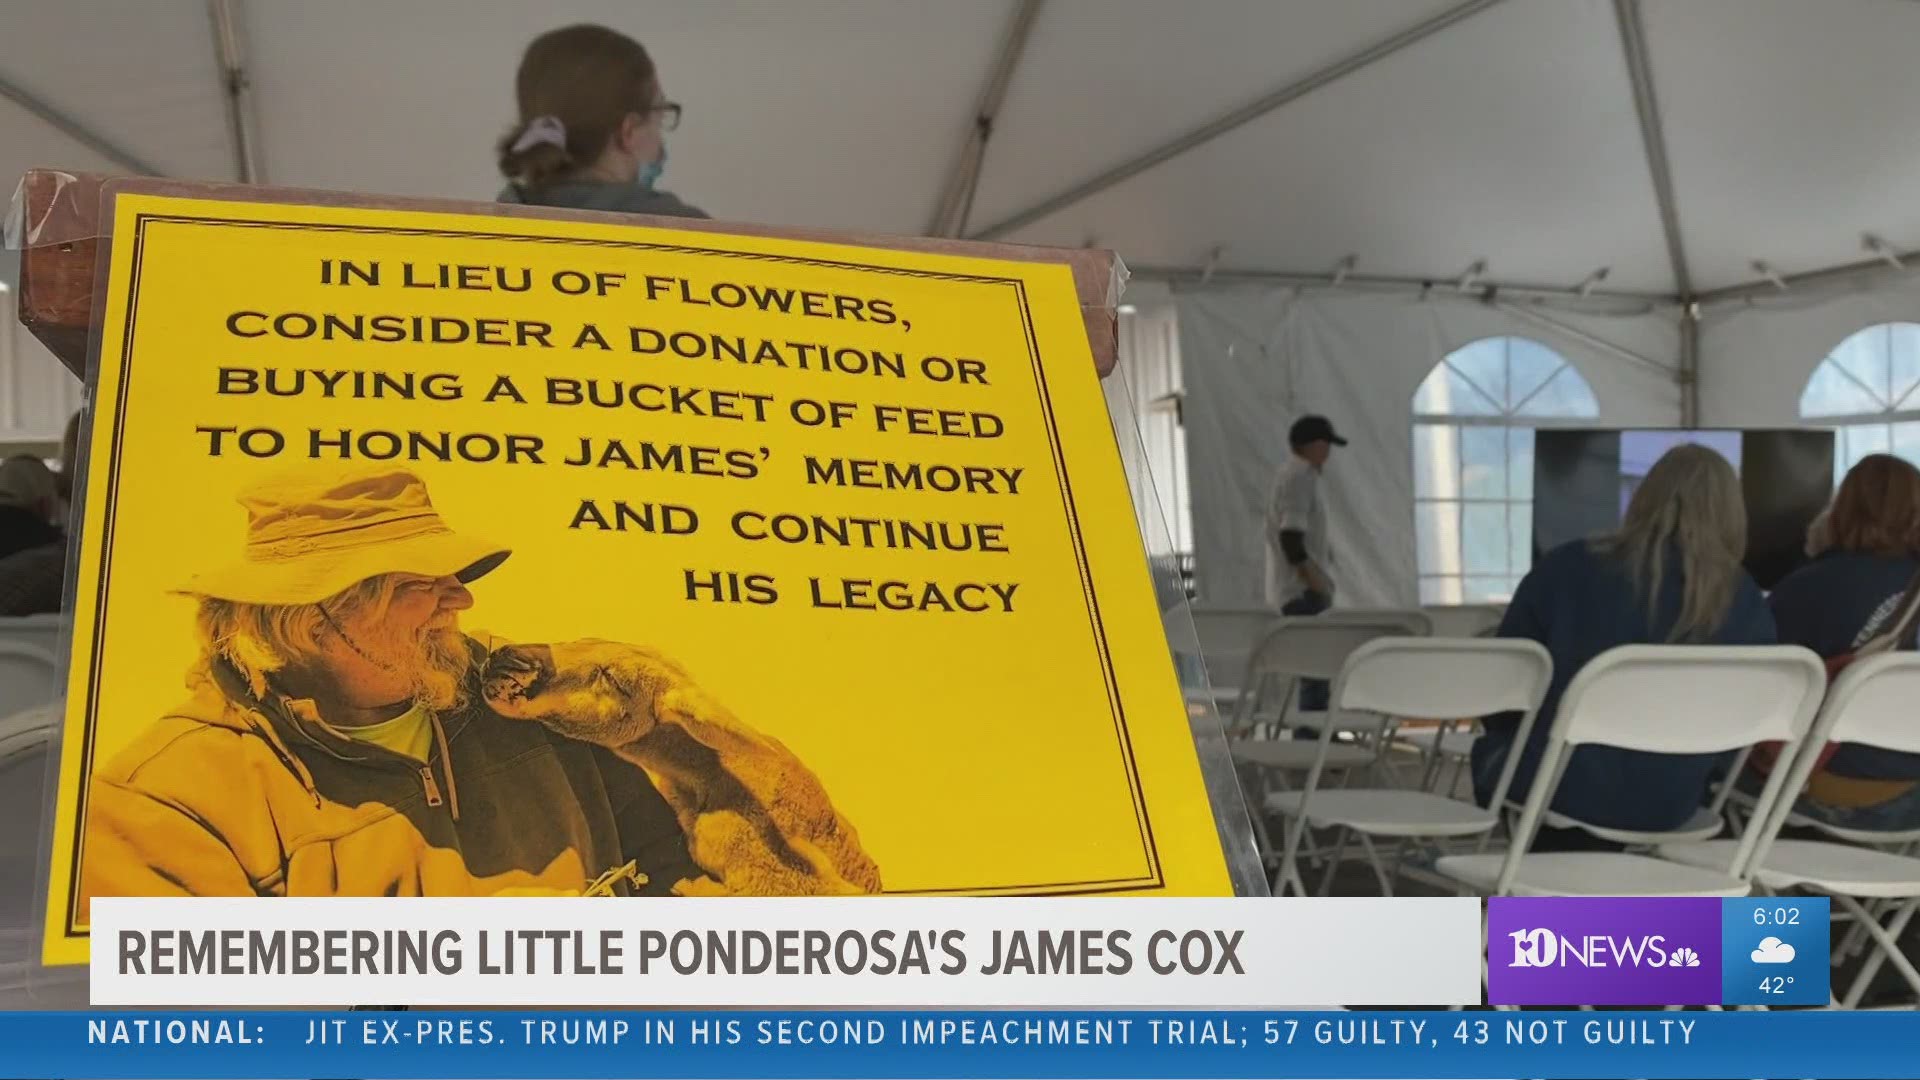 THE EAST TENNESSEE COMMUNITY IS HONORING JAMES COX... THE OWNER OF LITTLE PONDEROSA ZOO IN CLINTON.